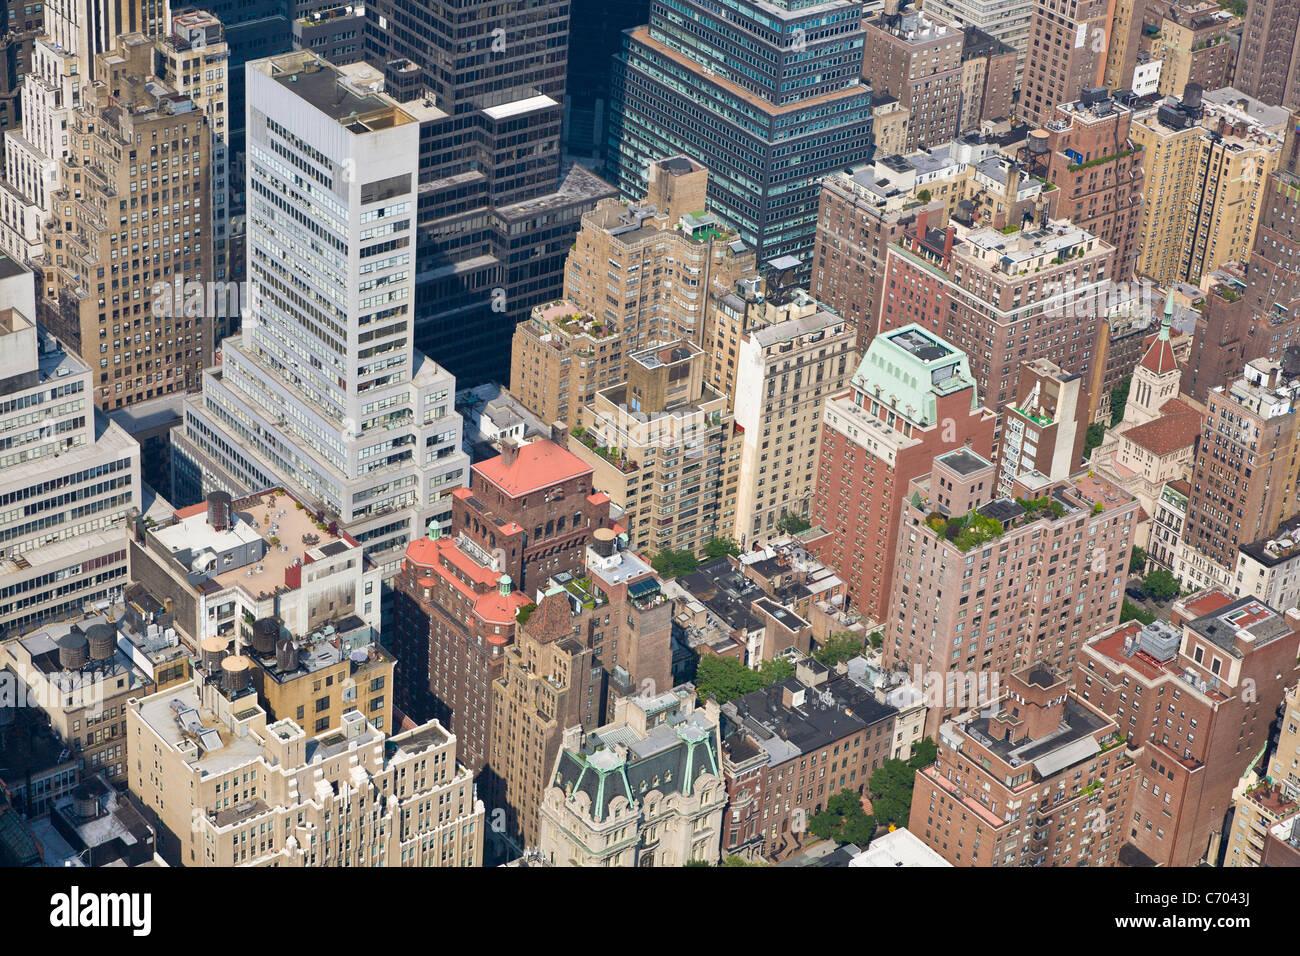 Looking down on Manhattan buildings from the top of Empire State Building in New York City Stock Photo